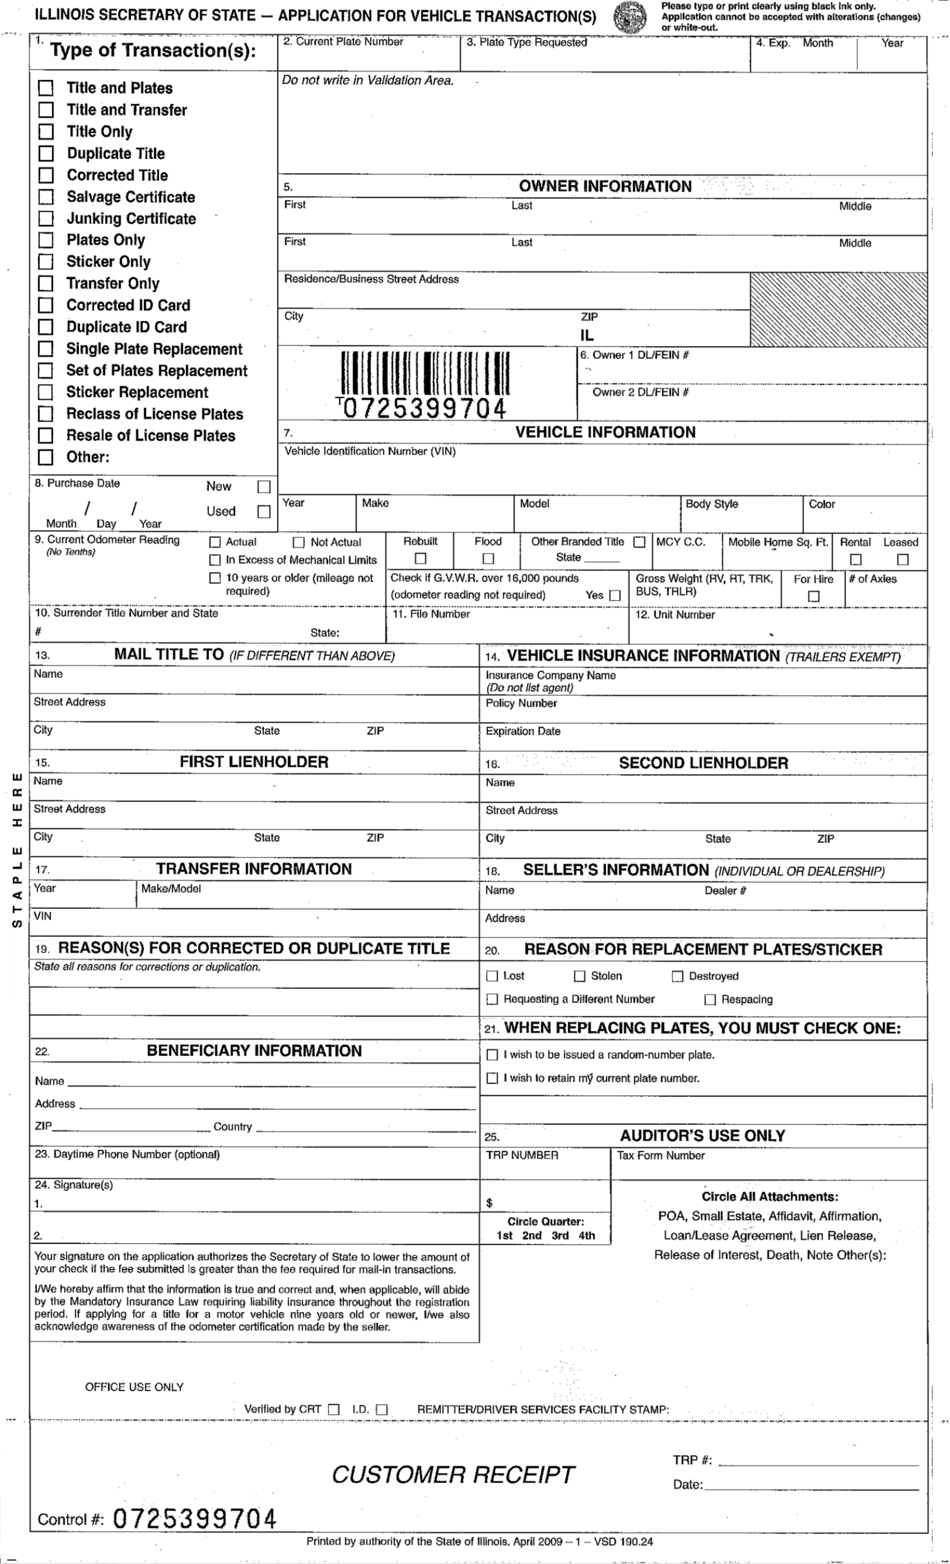 Form VSD190.24 Application for Vehicle Transaction(S) - Illinois, Page 1